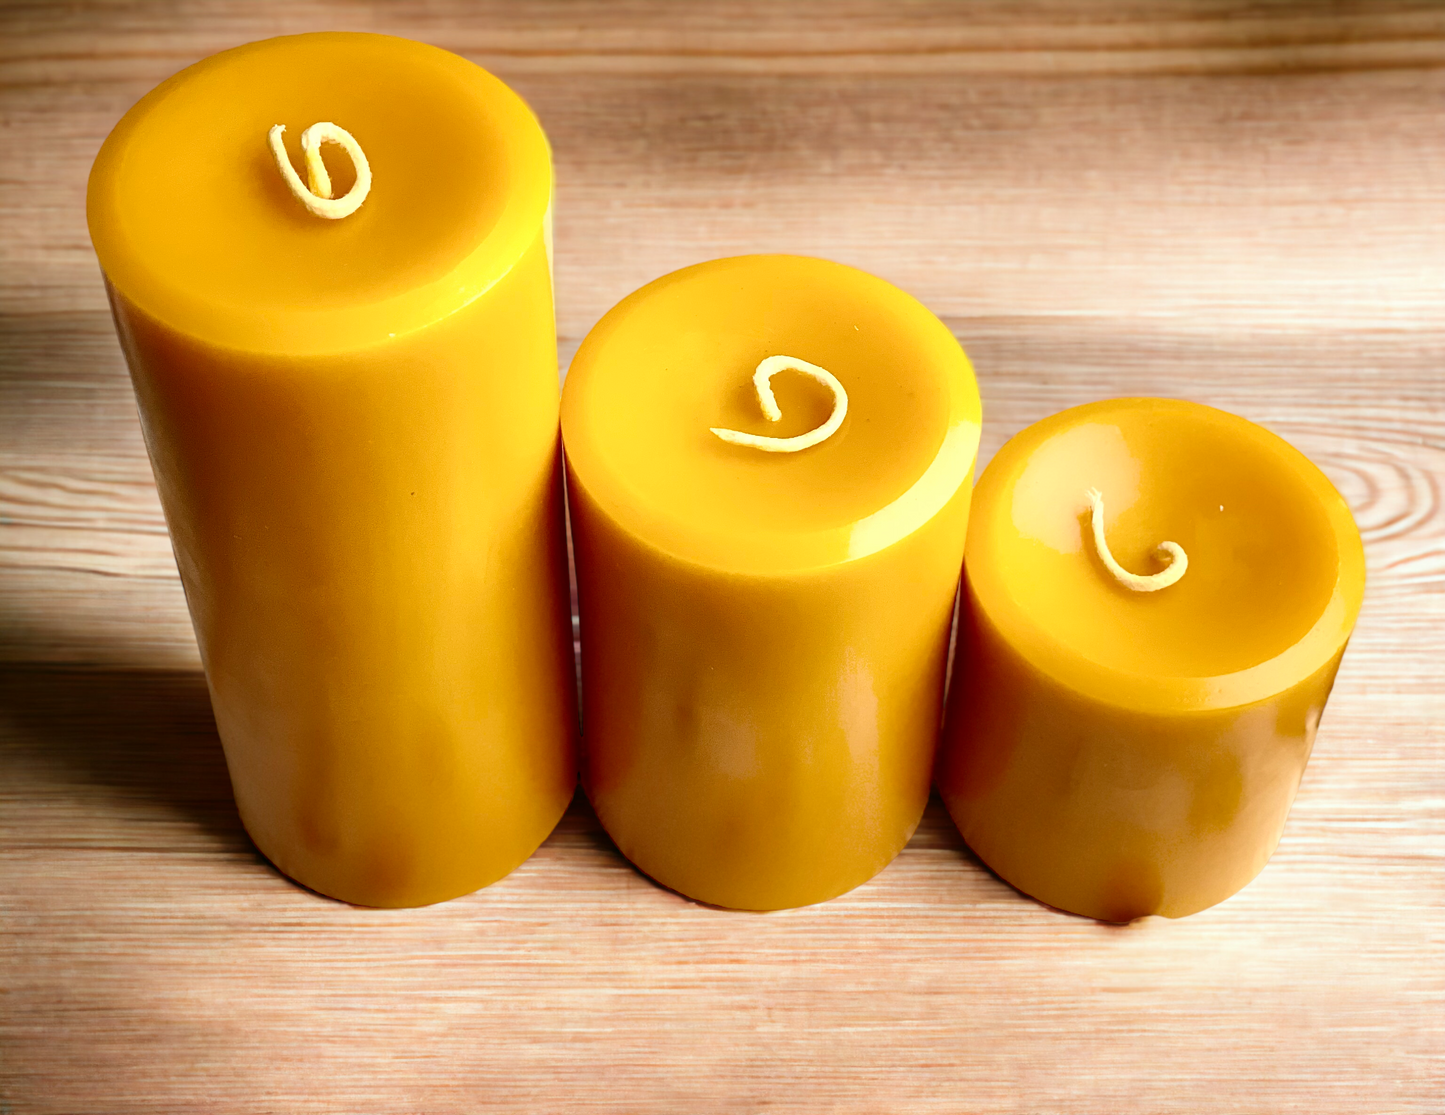 4" wide Pure Beeswax Pillar Candle up to 9" tall